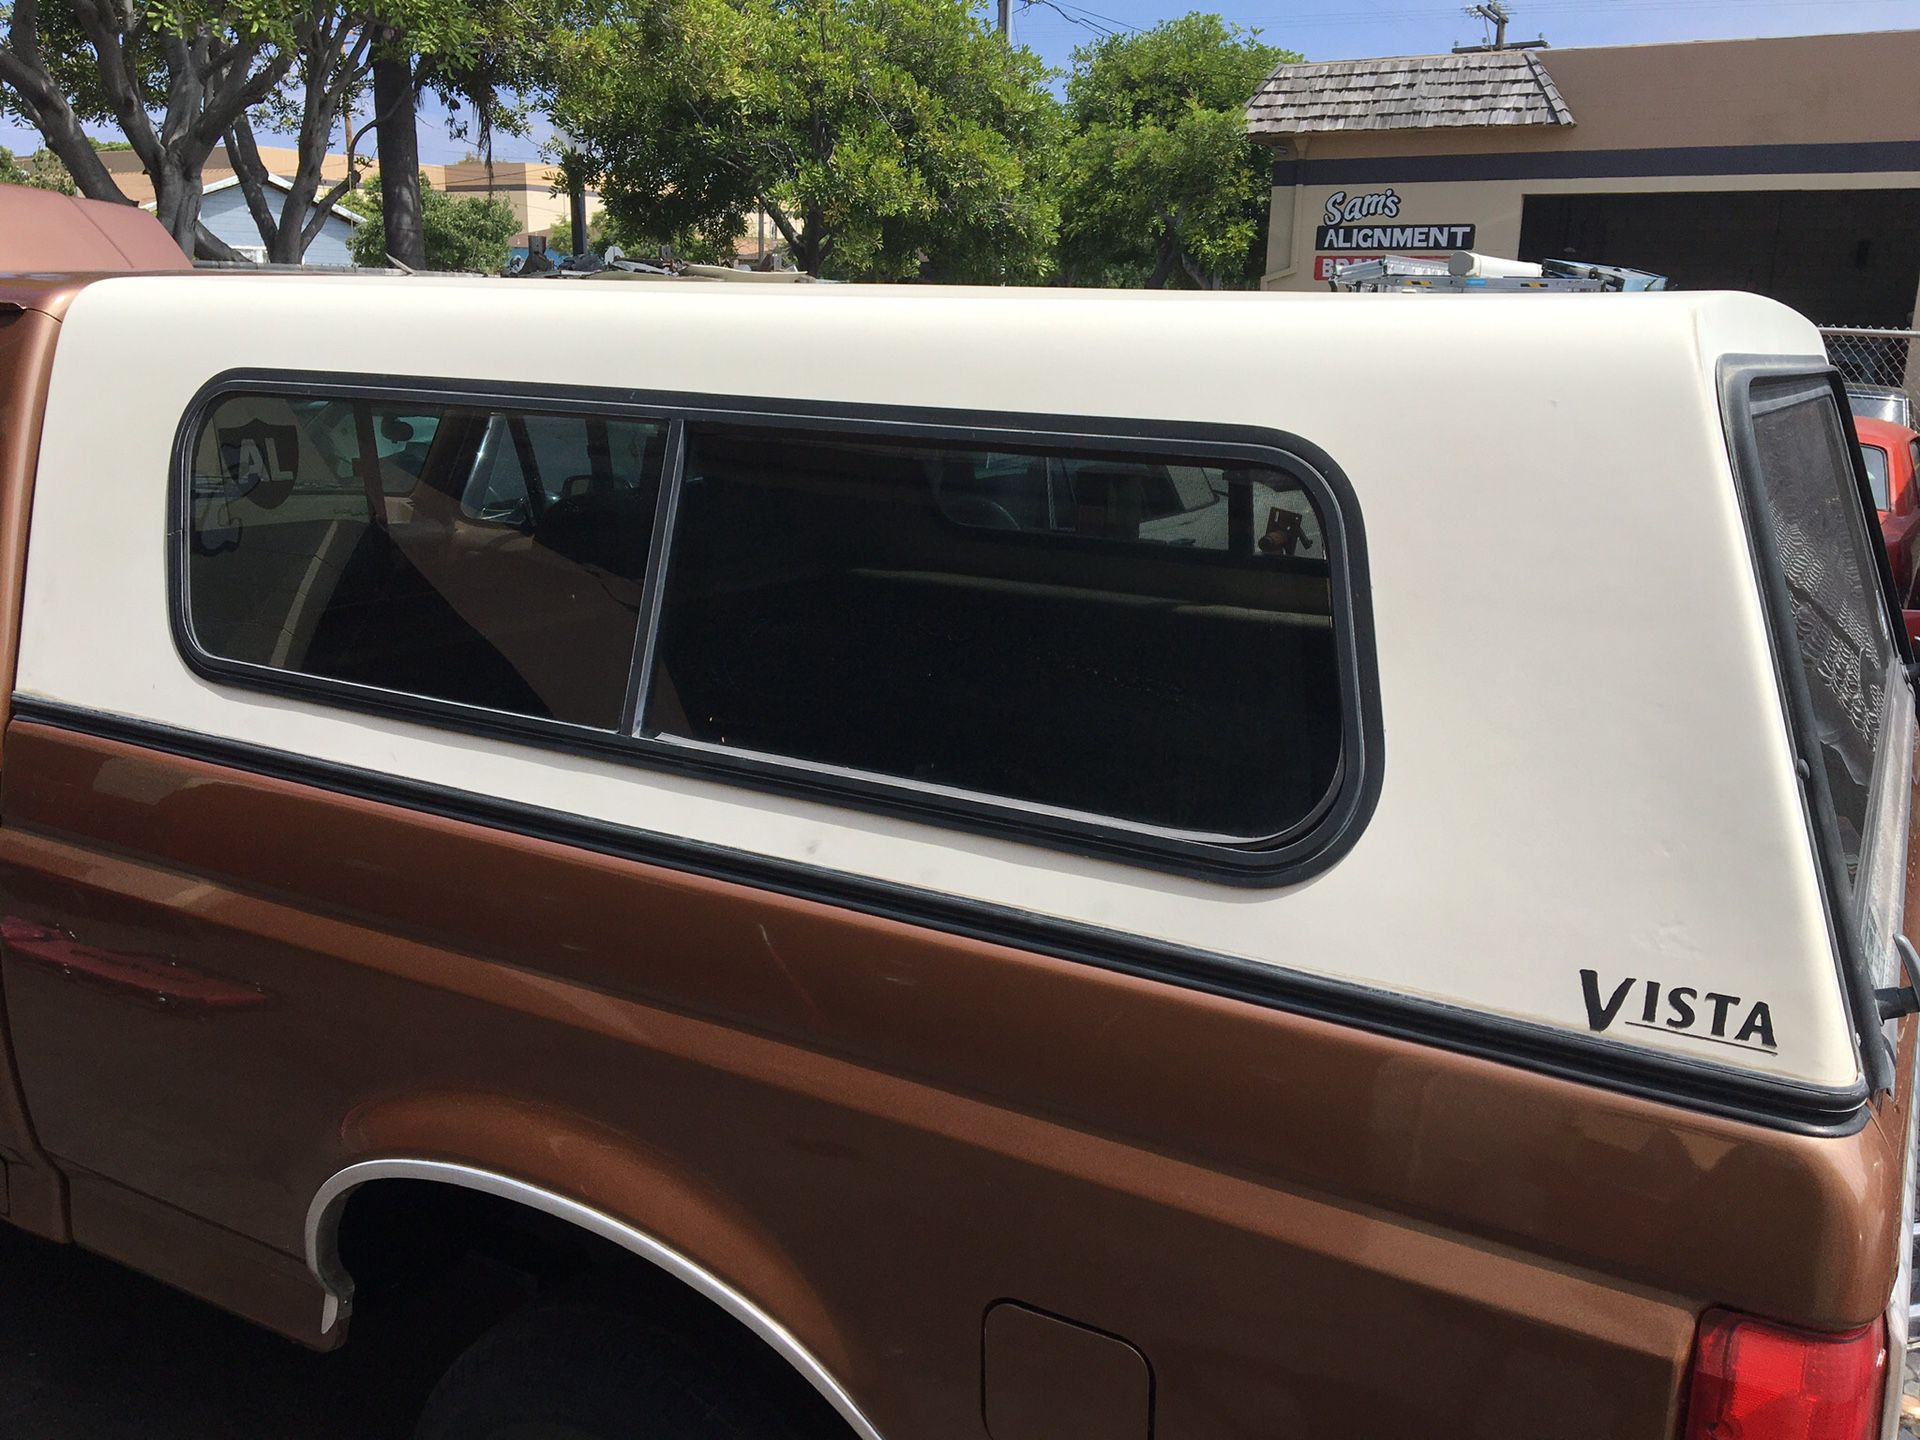 Vista camper shell is on a 1990 Shortbed Ford